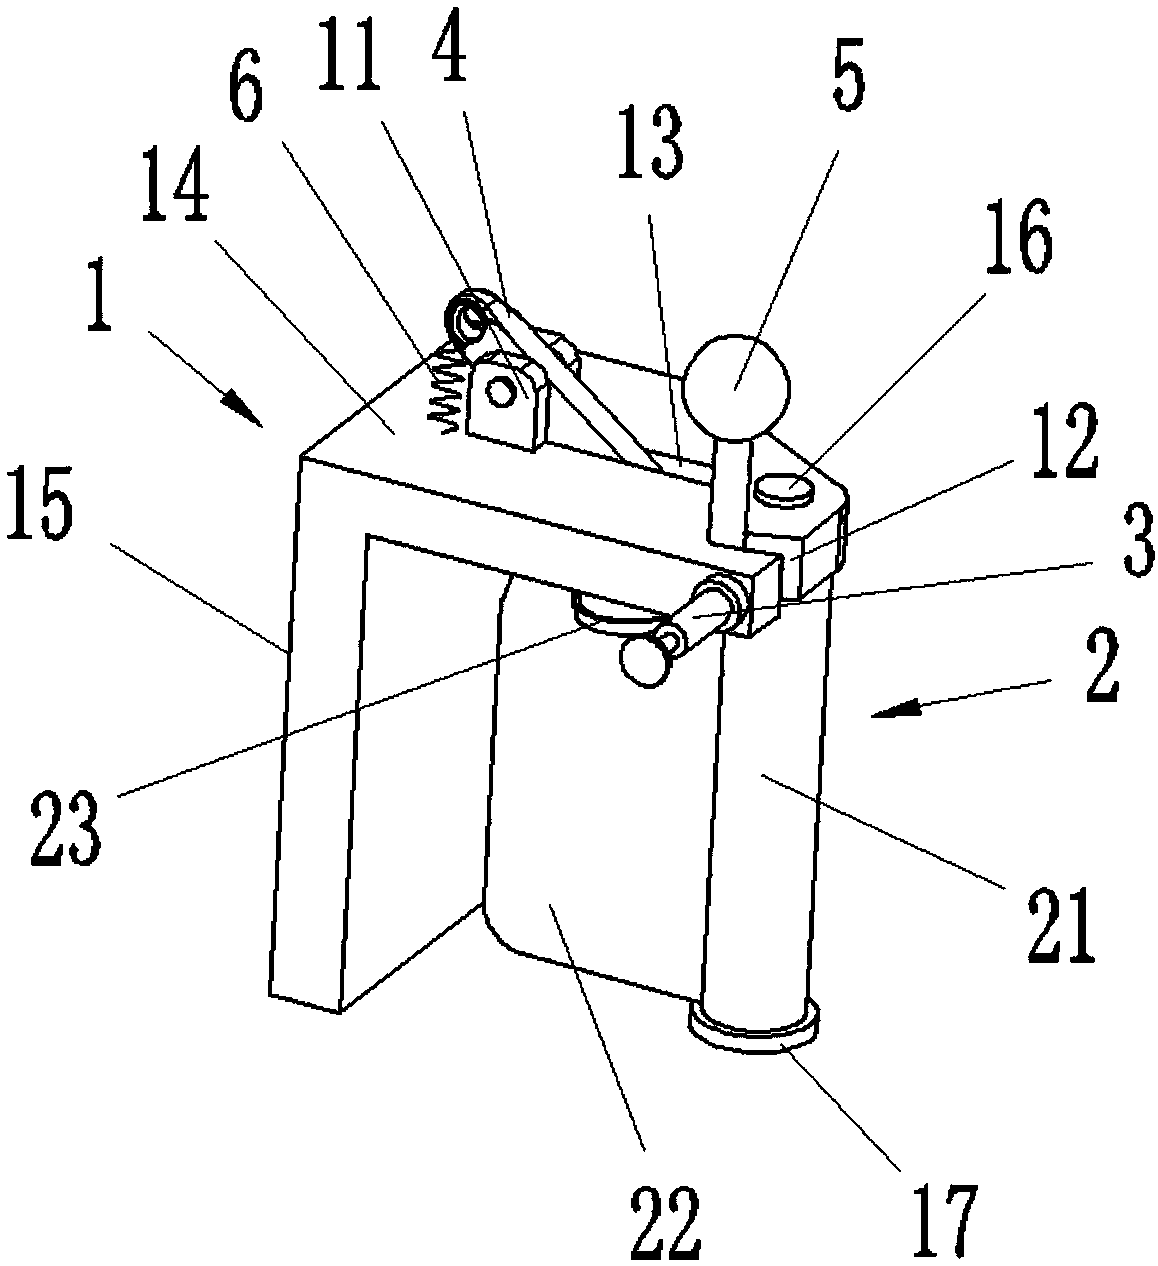 Anti-loosing easily-operated steel channel hoisting device